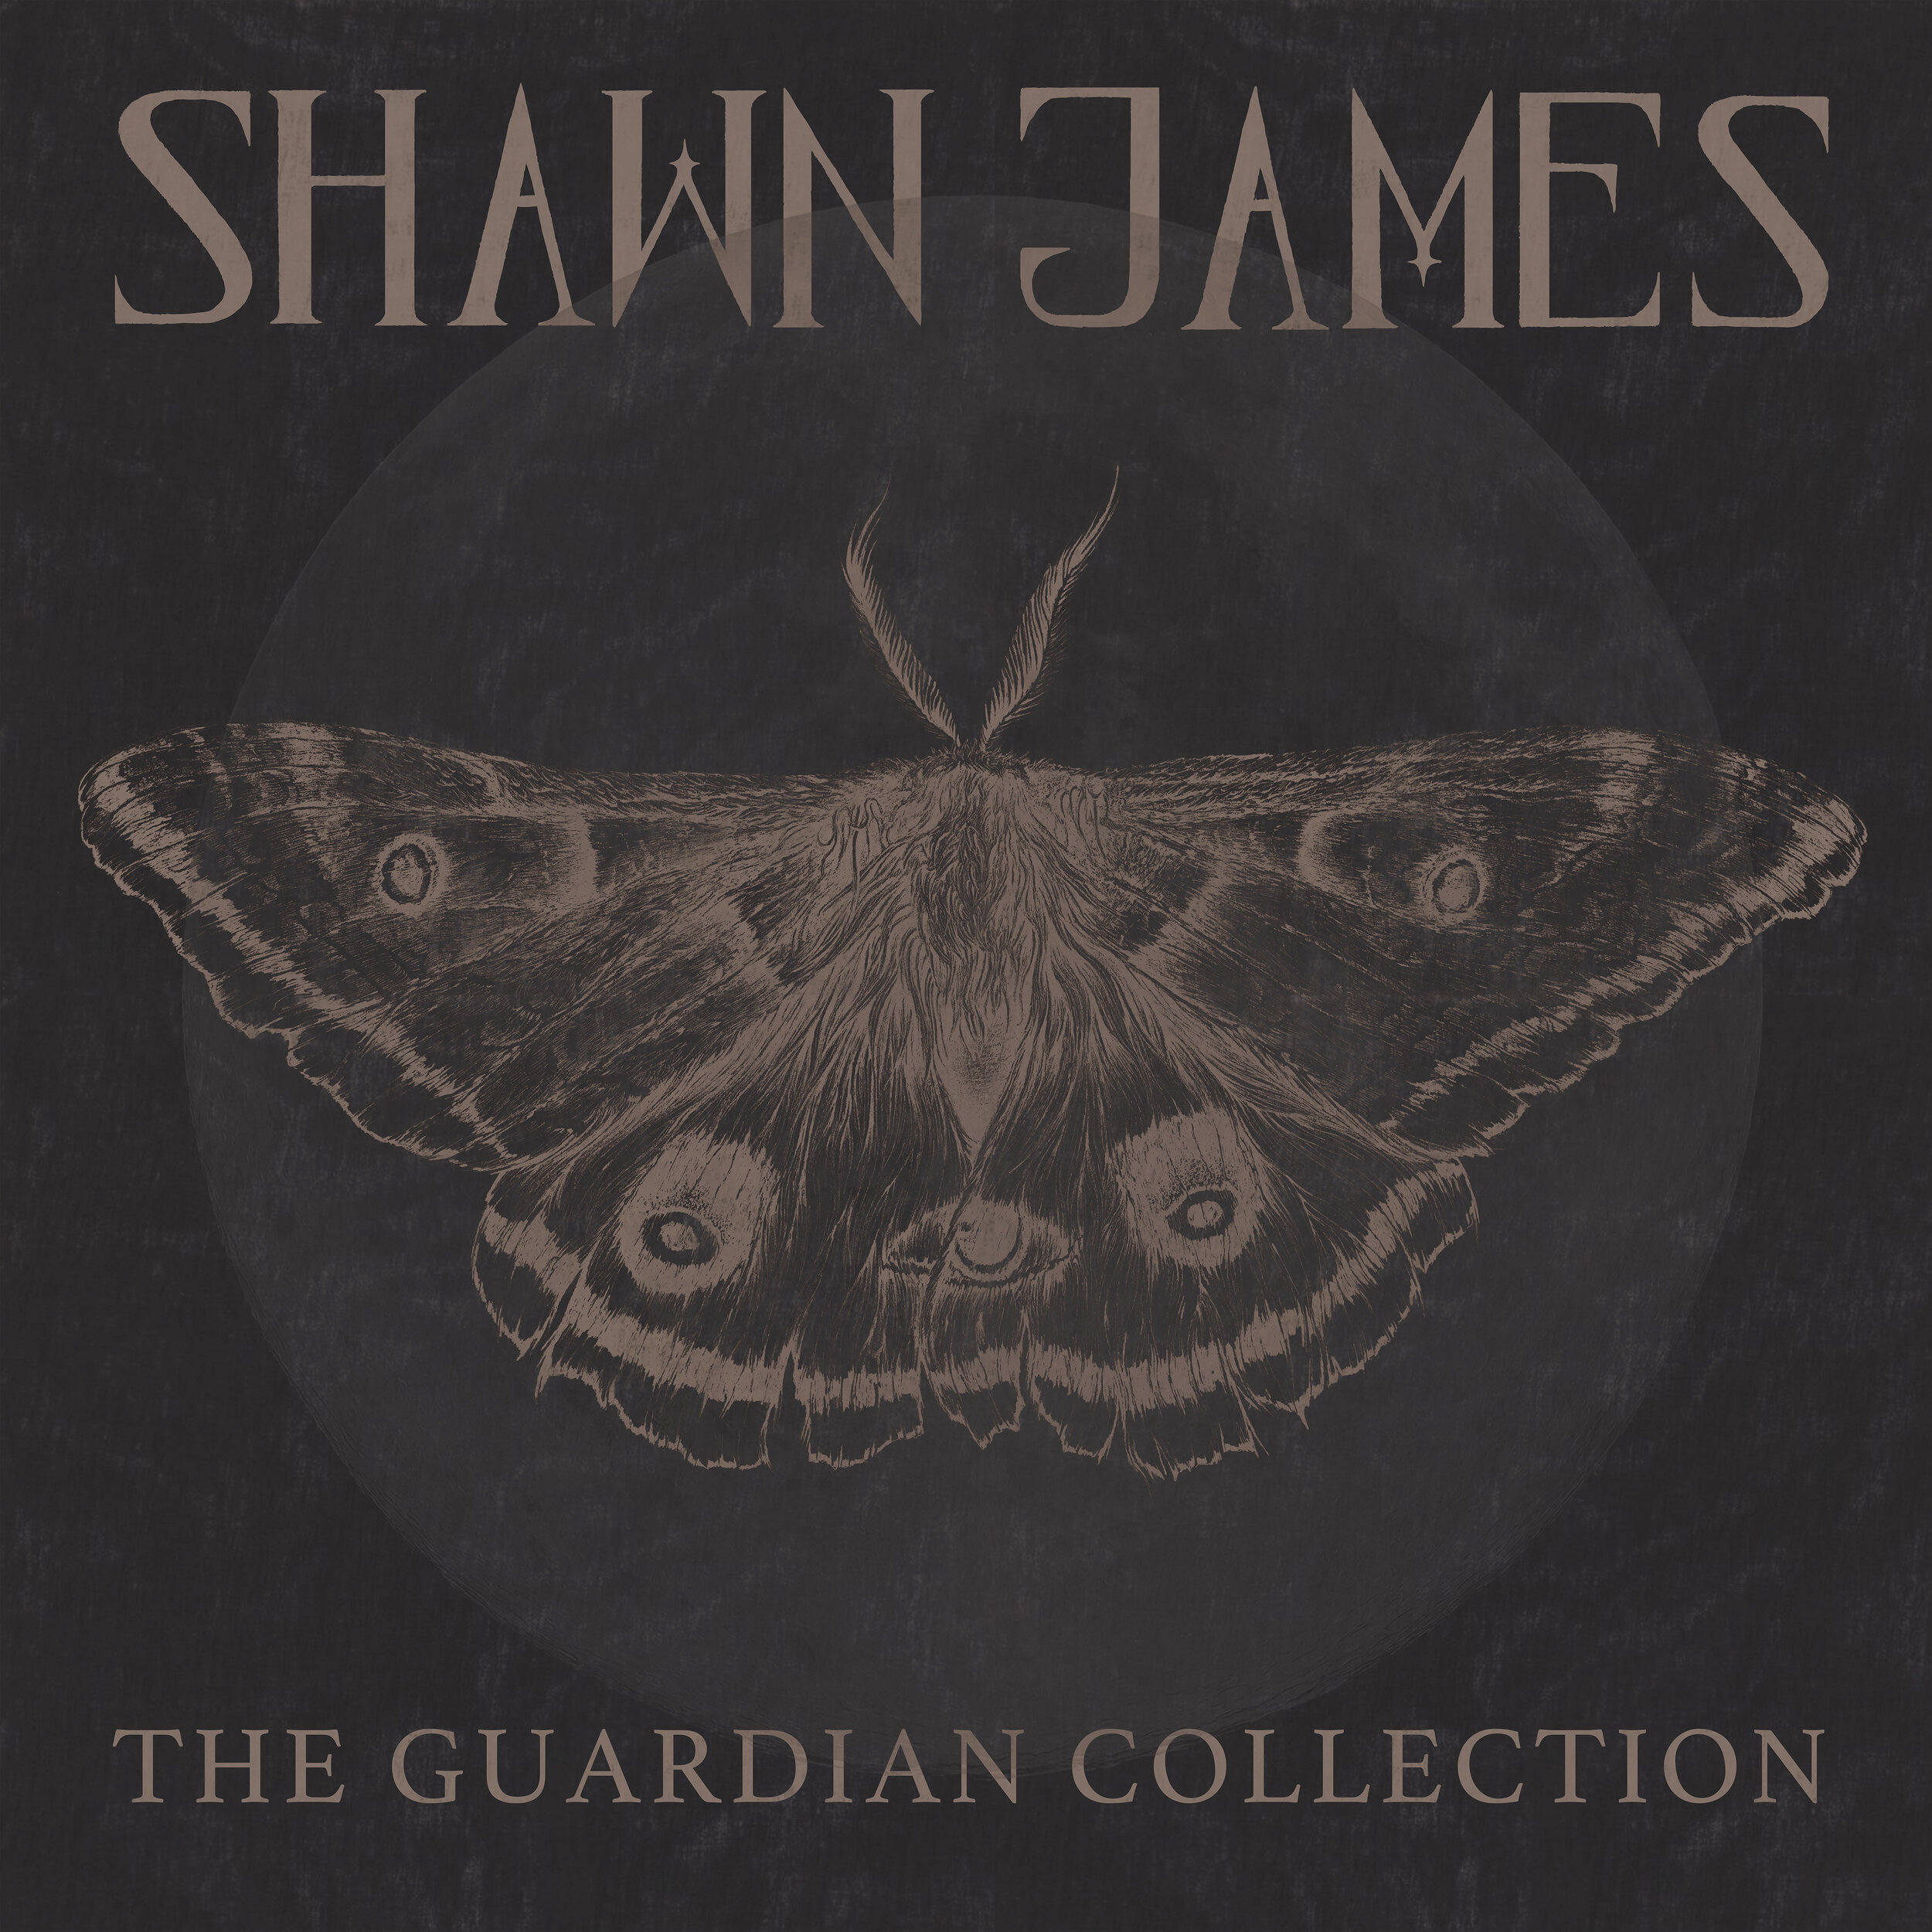 Shawn James - The Guardian Collection - Cover Artwork 5000x5000.jpg